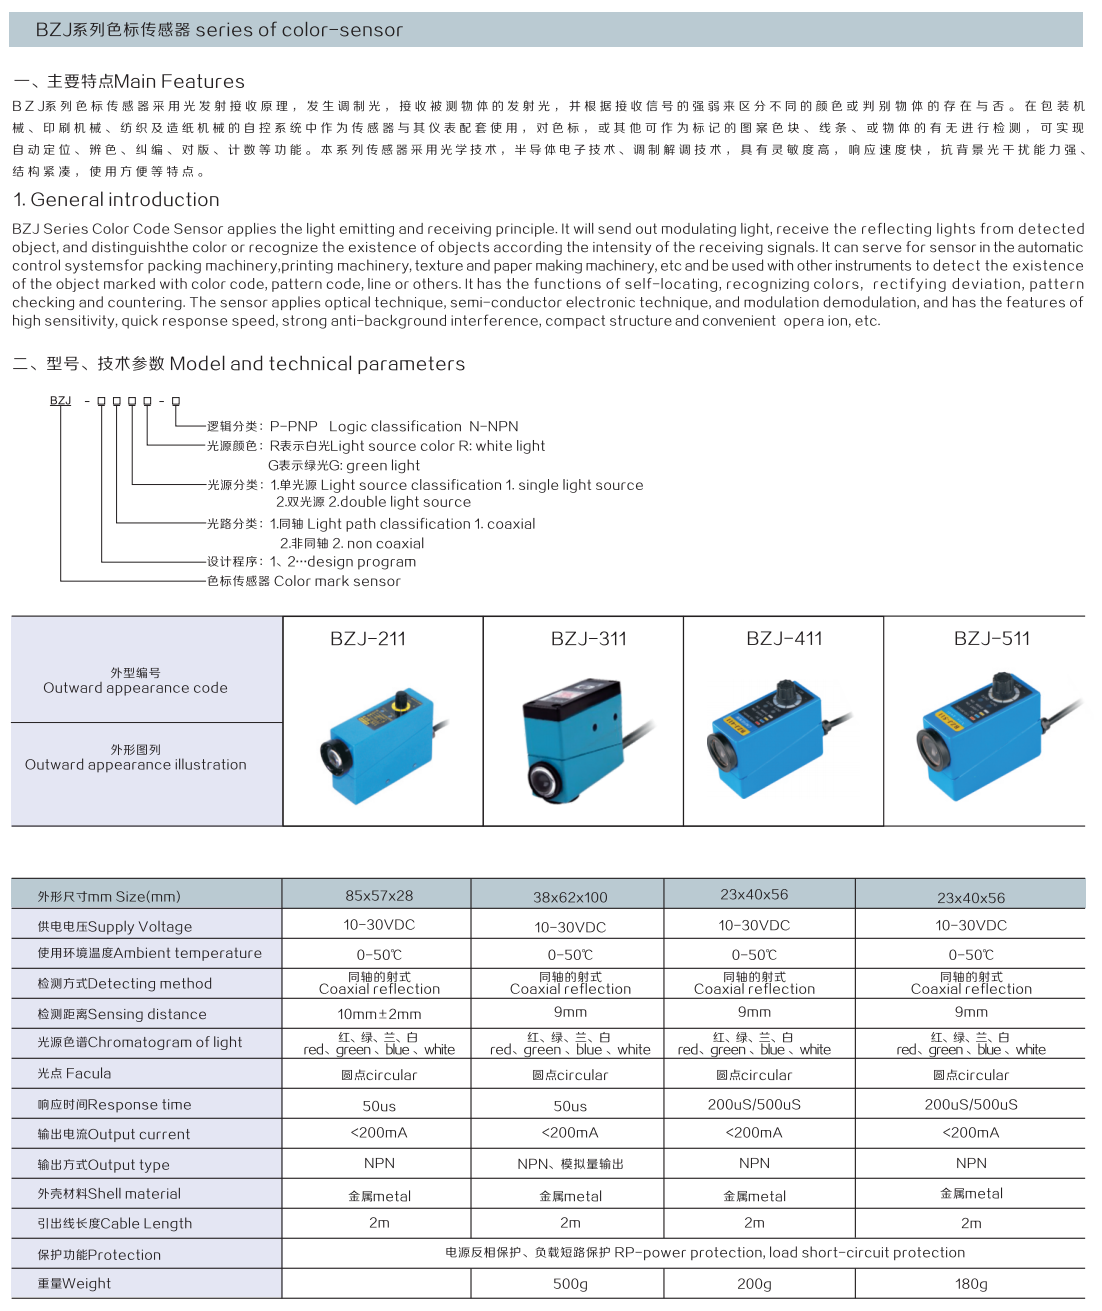 Series of color-sensor,Main features,Model and technical parameters,